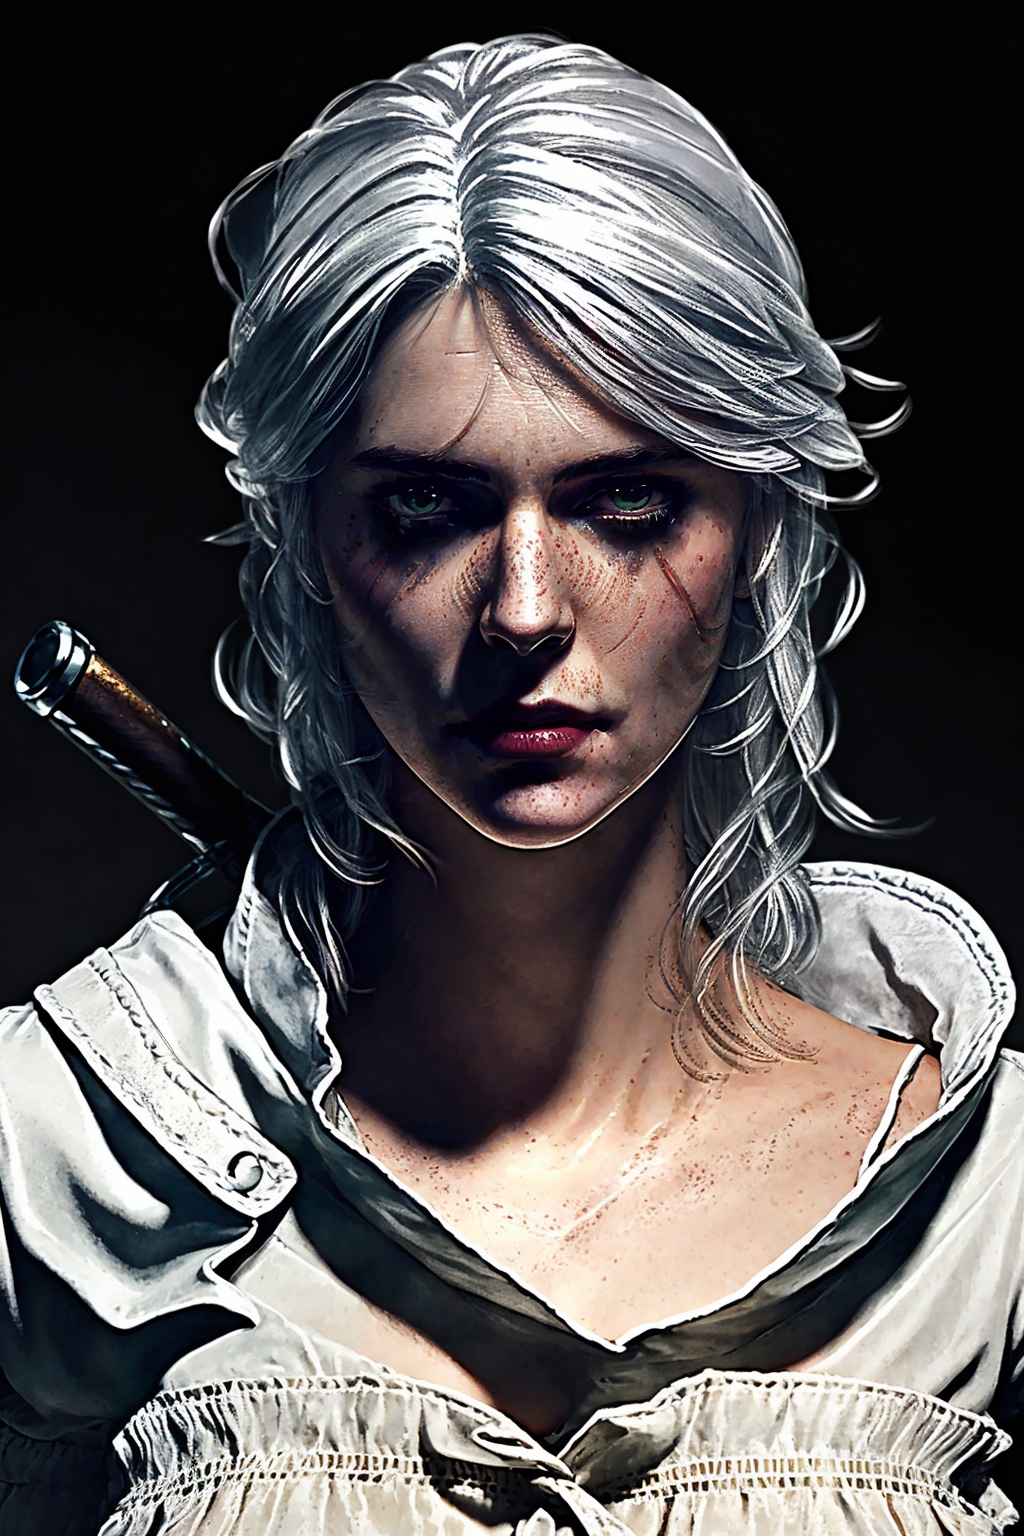 Cirilla Fiona Elen Riannon image by ngsm000